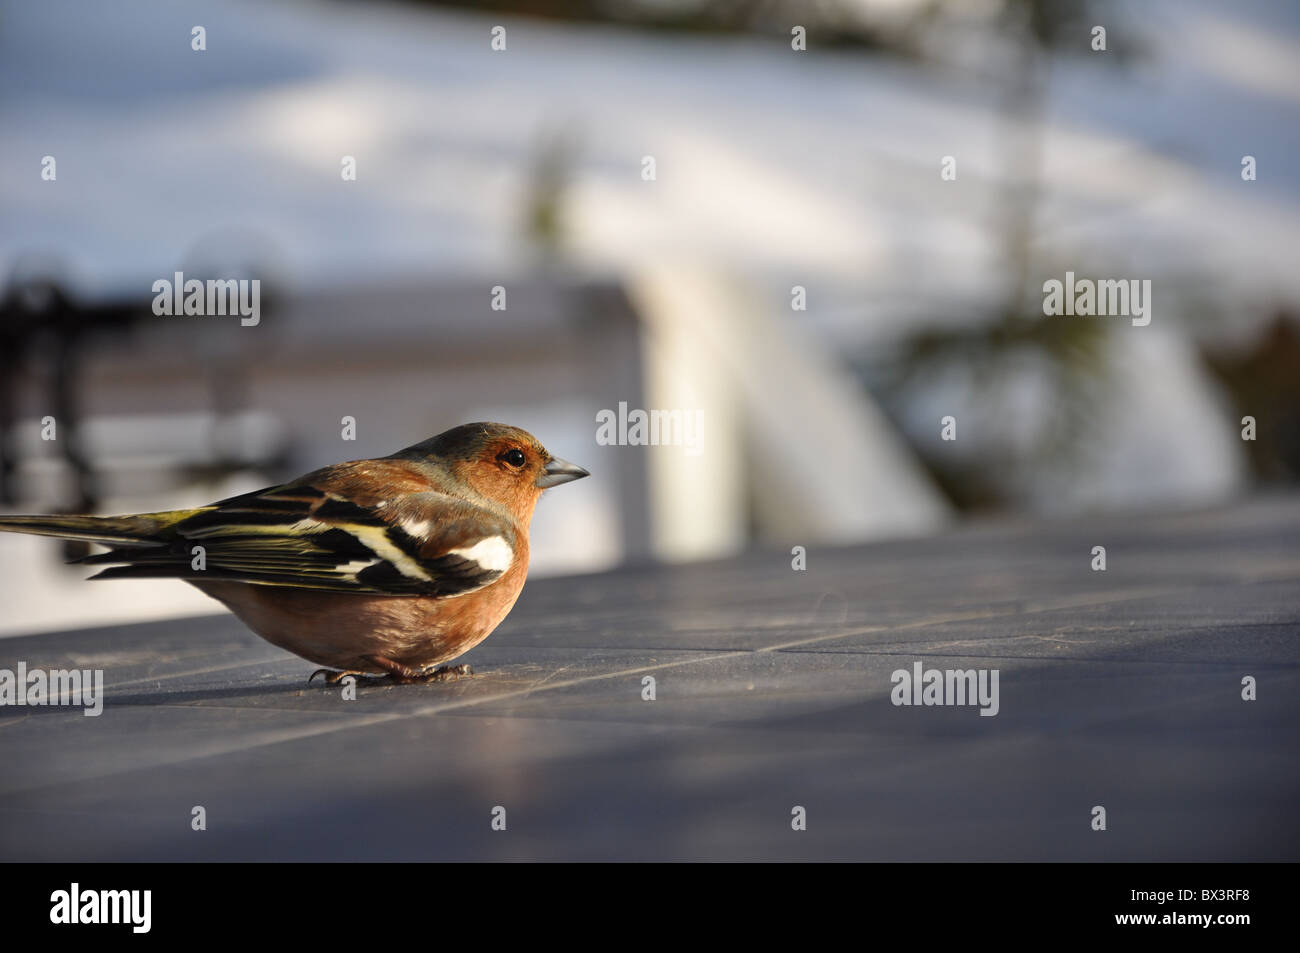 This little chaffinch was recovering on a cabin table. Half an hour earlier it had hit a window and was a bit dizzy. Stock Photo